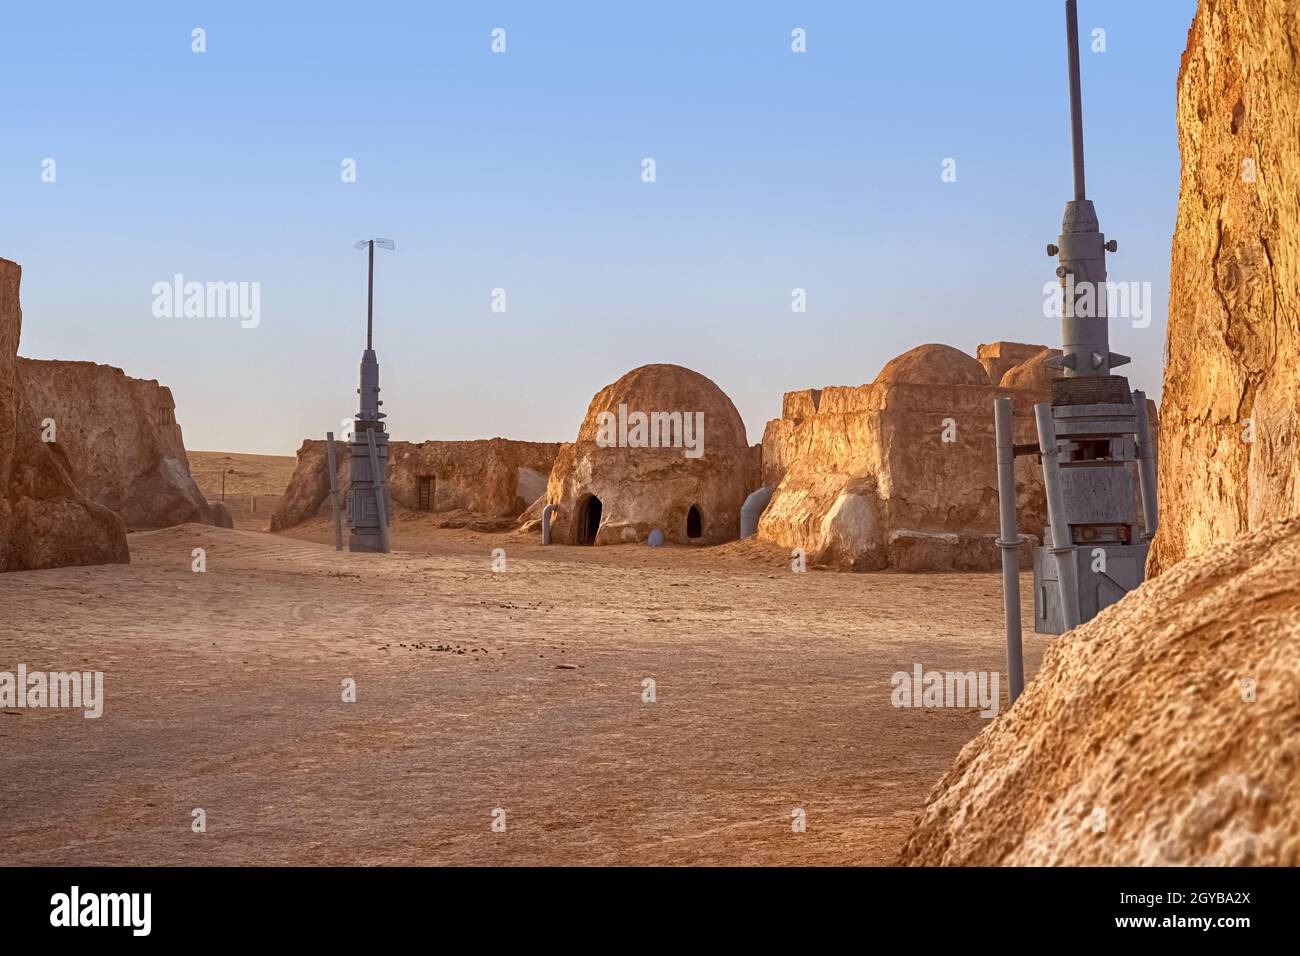 SAKHARA, Tunisia - May 17, 2021: The abandoned scenery of the planet Tatooine for the filming of Star Wars in the Sahara Desert with sand dunes in the Stock Photo